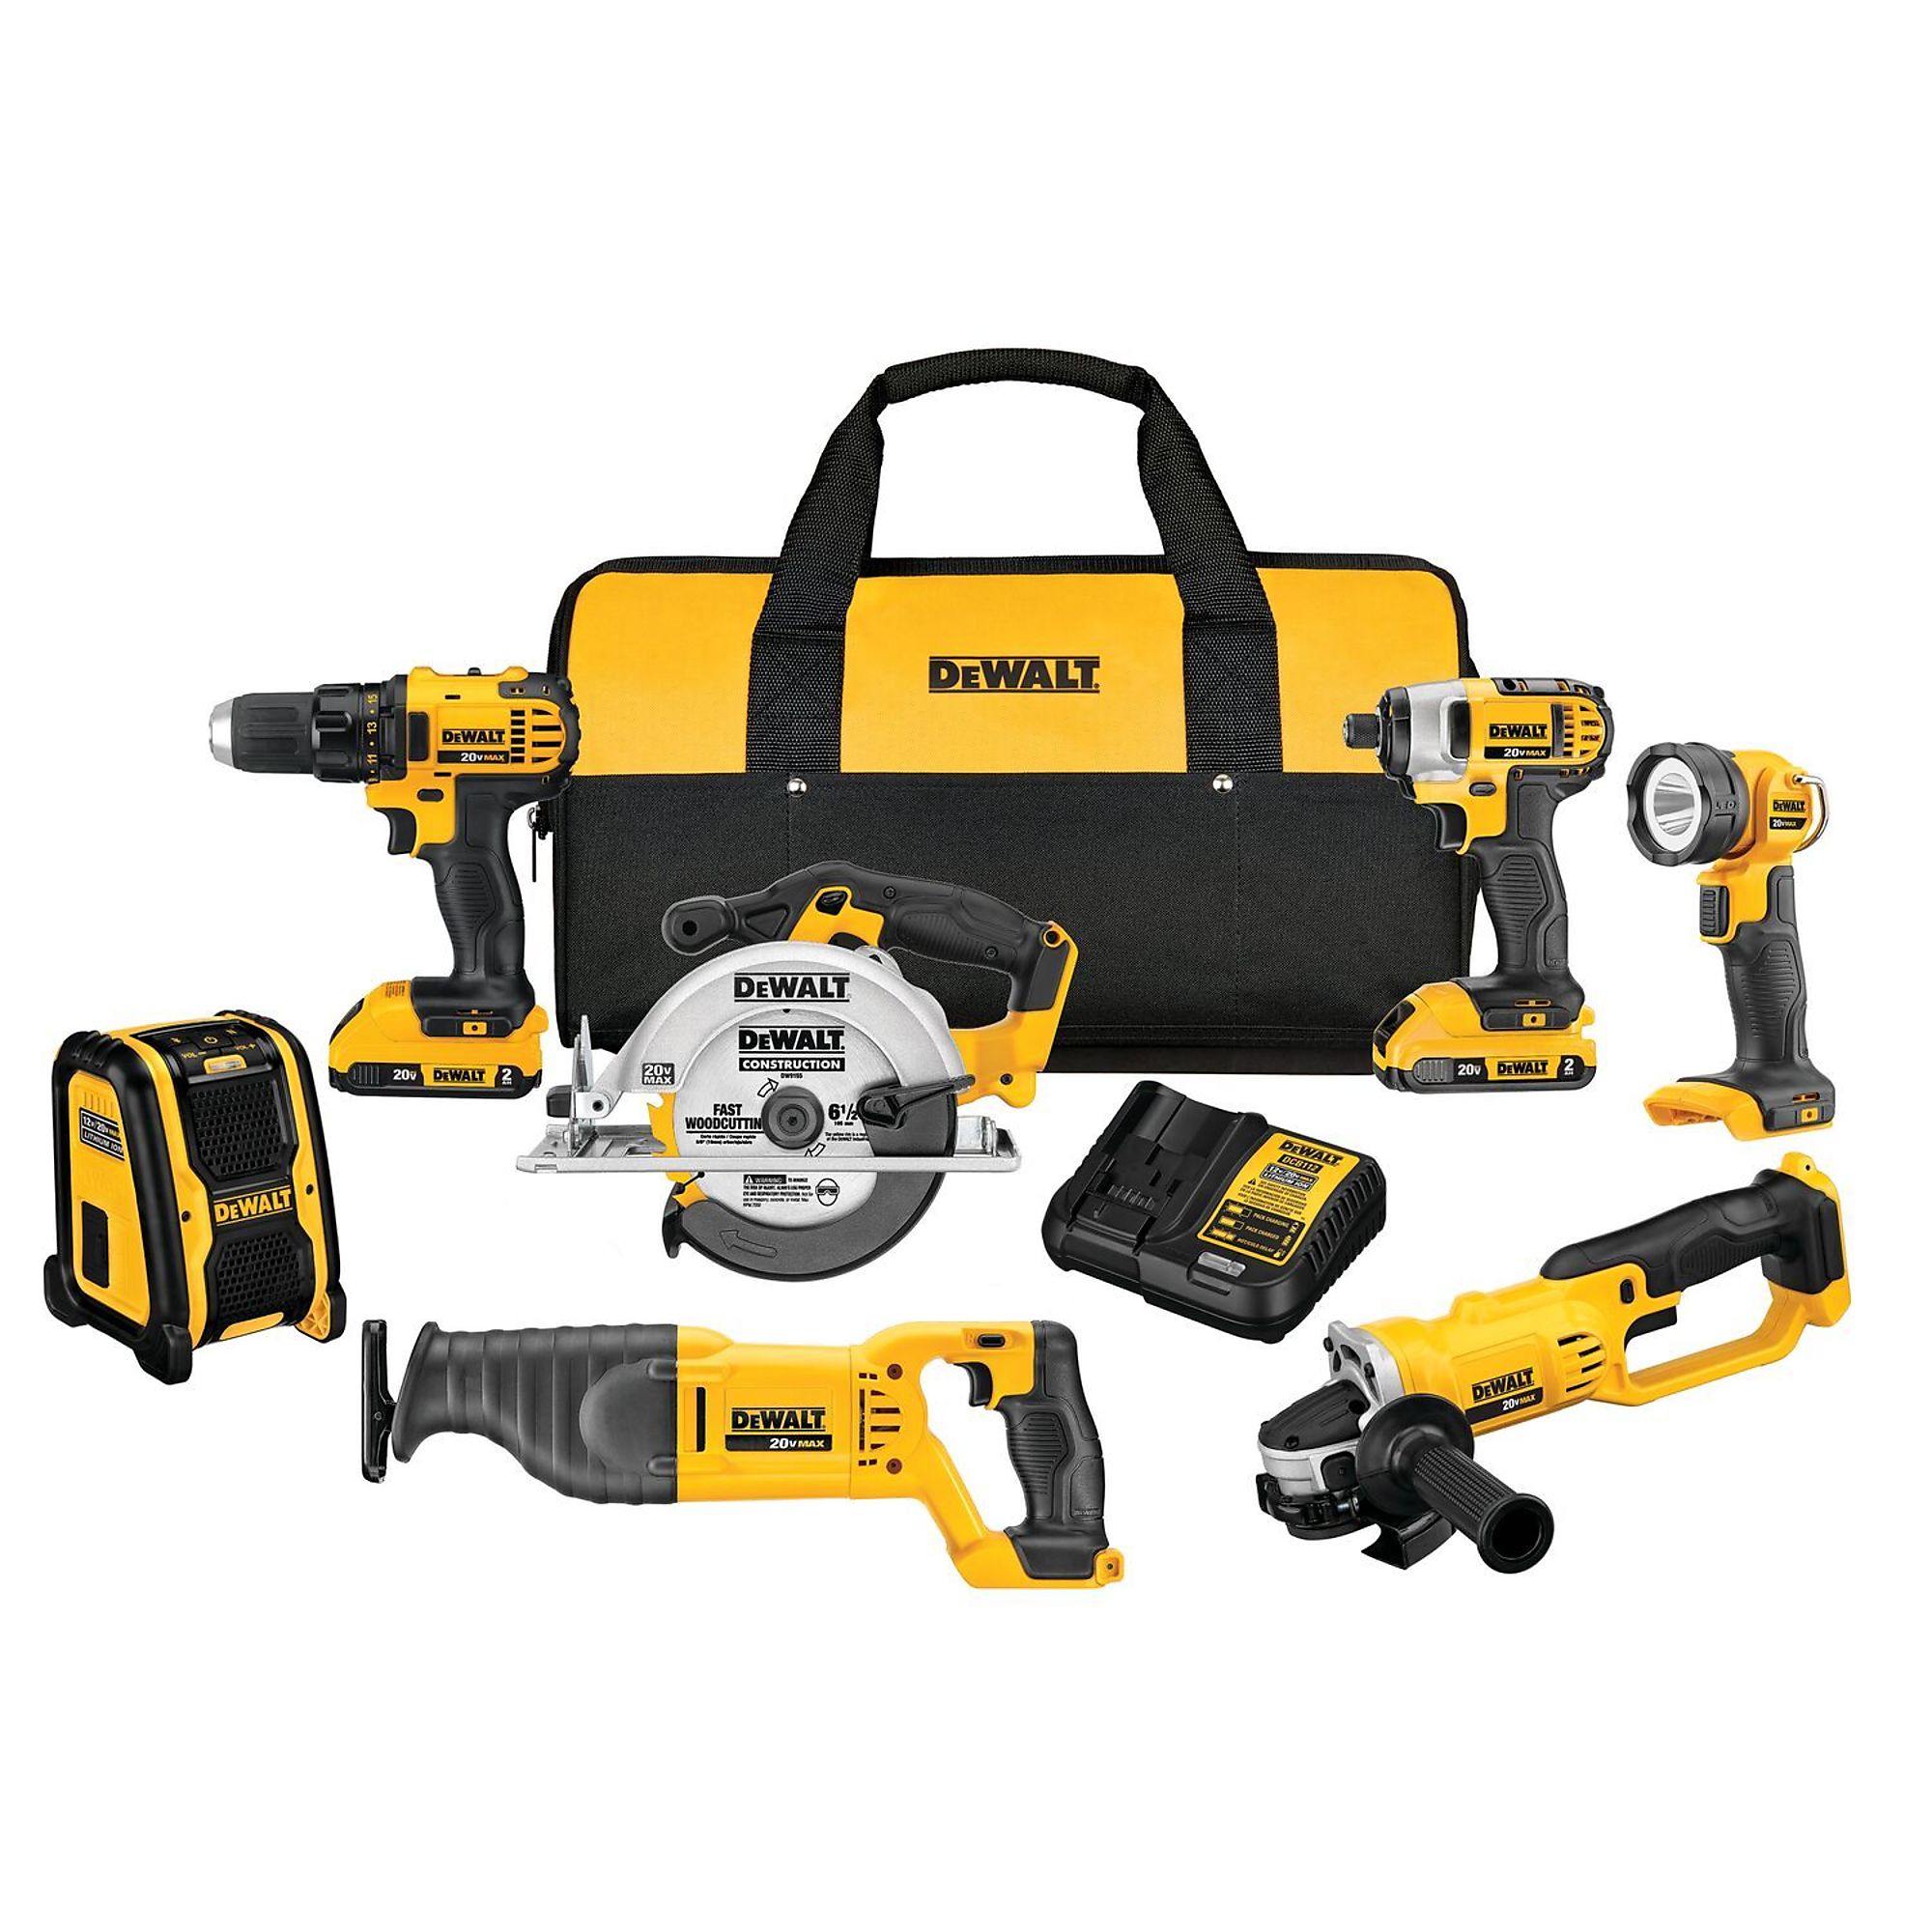 DEWALT, 20V MAX* Combo Kit, Compact 7-Tool, Chuck Size 1/2 in, Drive Size 1/4 in, Tools Included (qty.) 7 Model DCK720D2